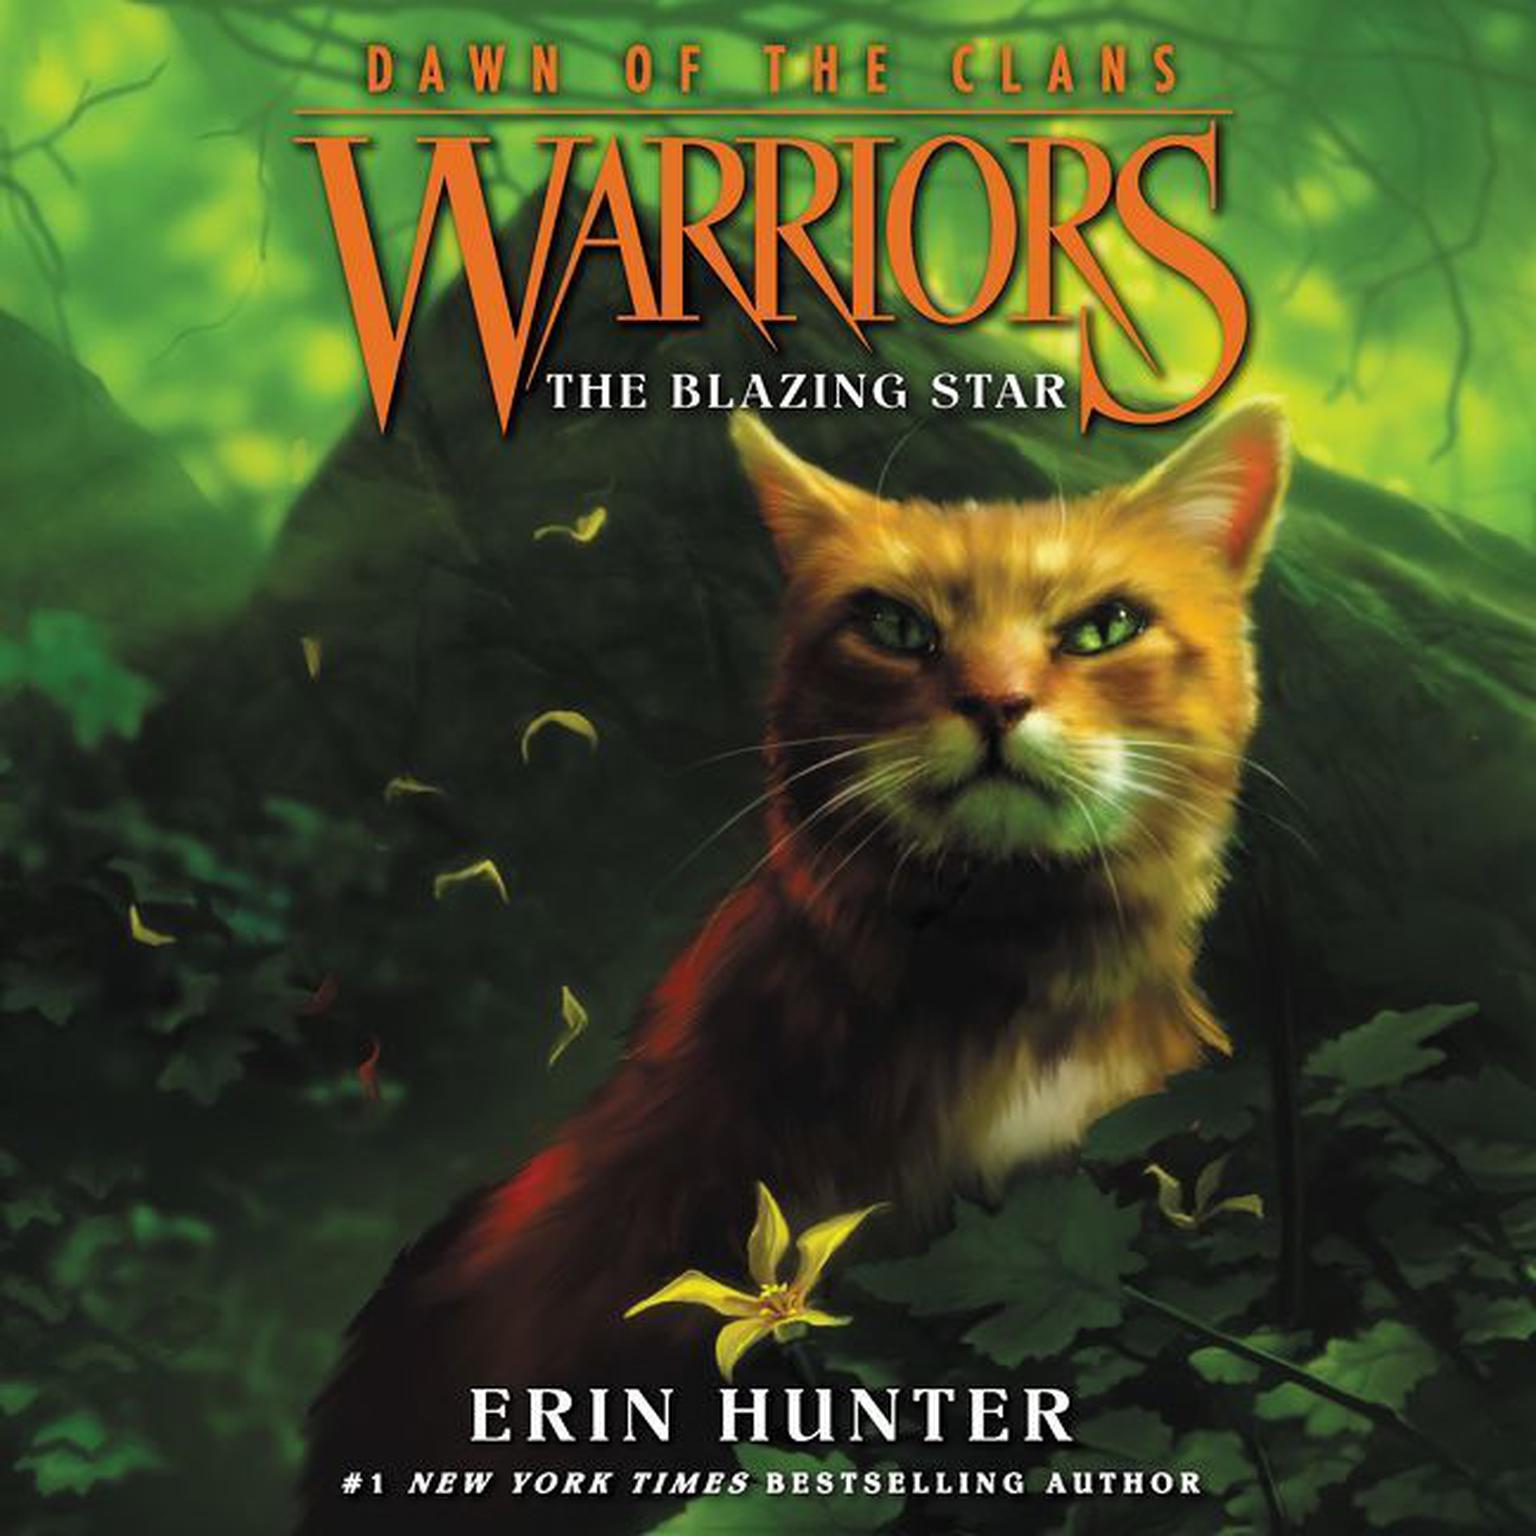 Warriors: Dawn of the Clans #4: The Blazing Star Audiobook, by Erin Hunter